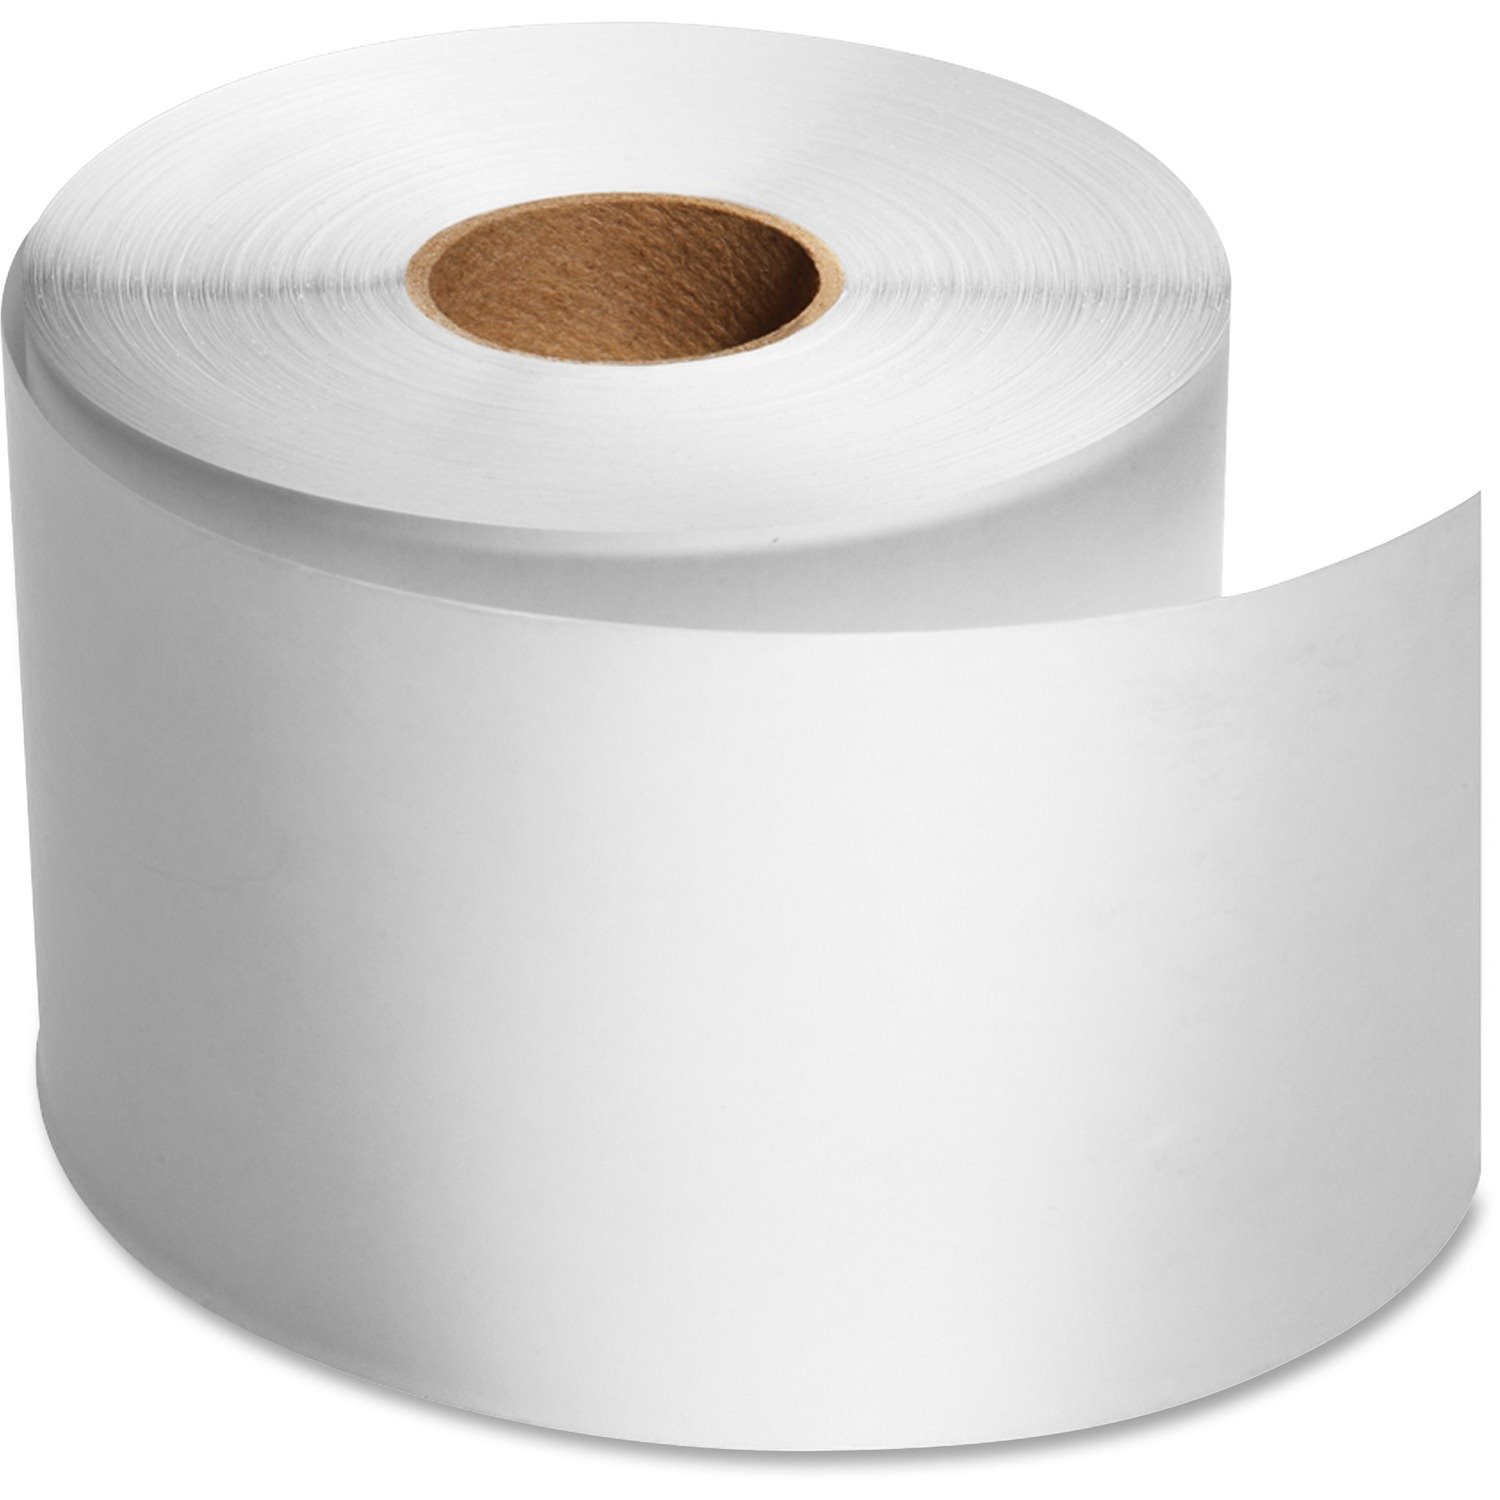 Dymo LabelWriters Continuous Roll Labels